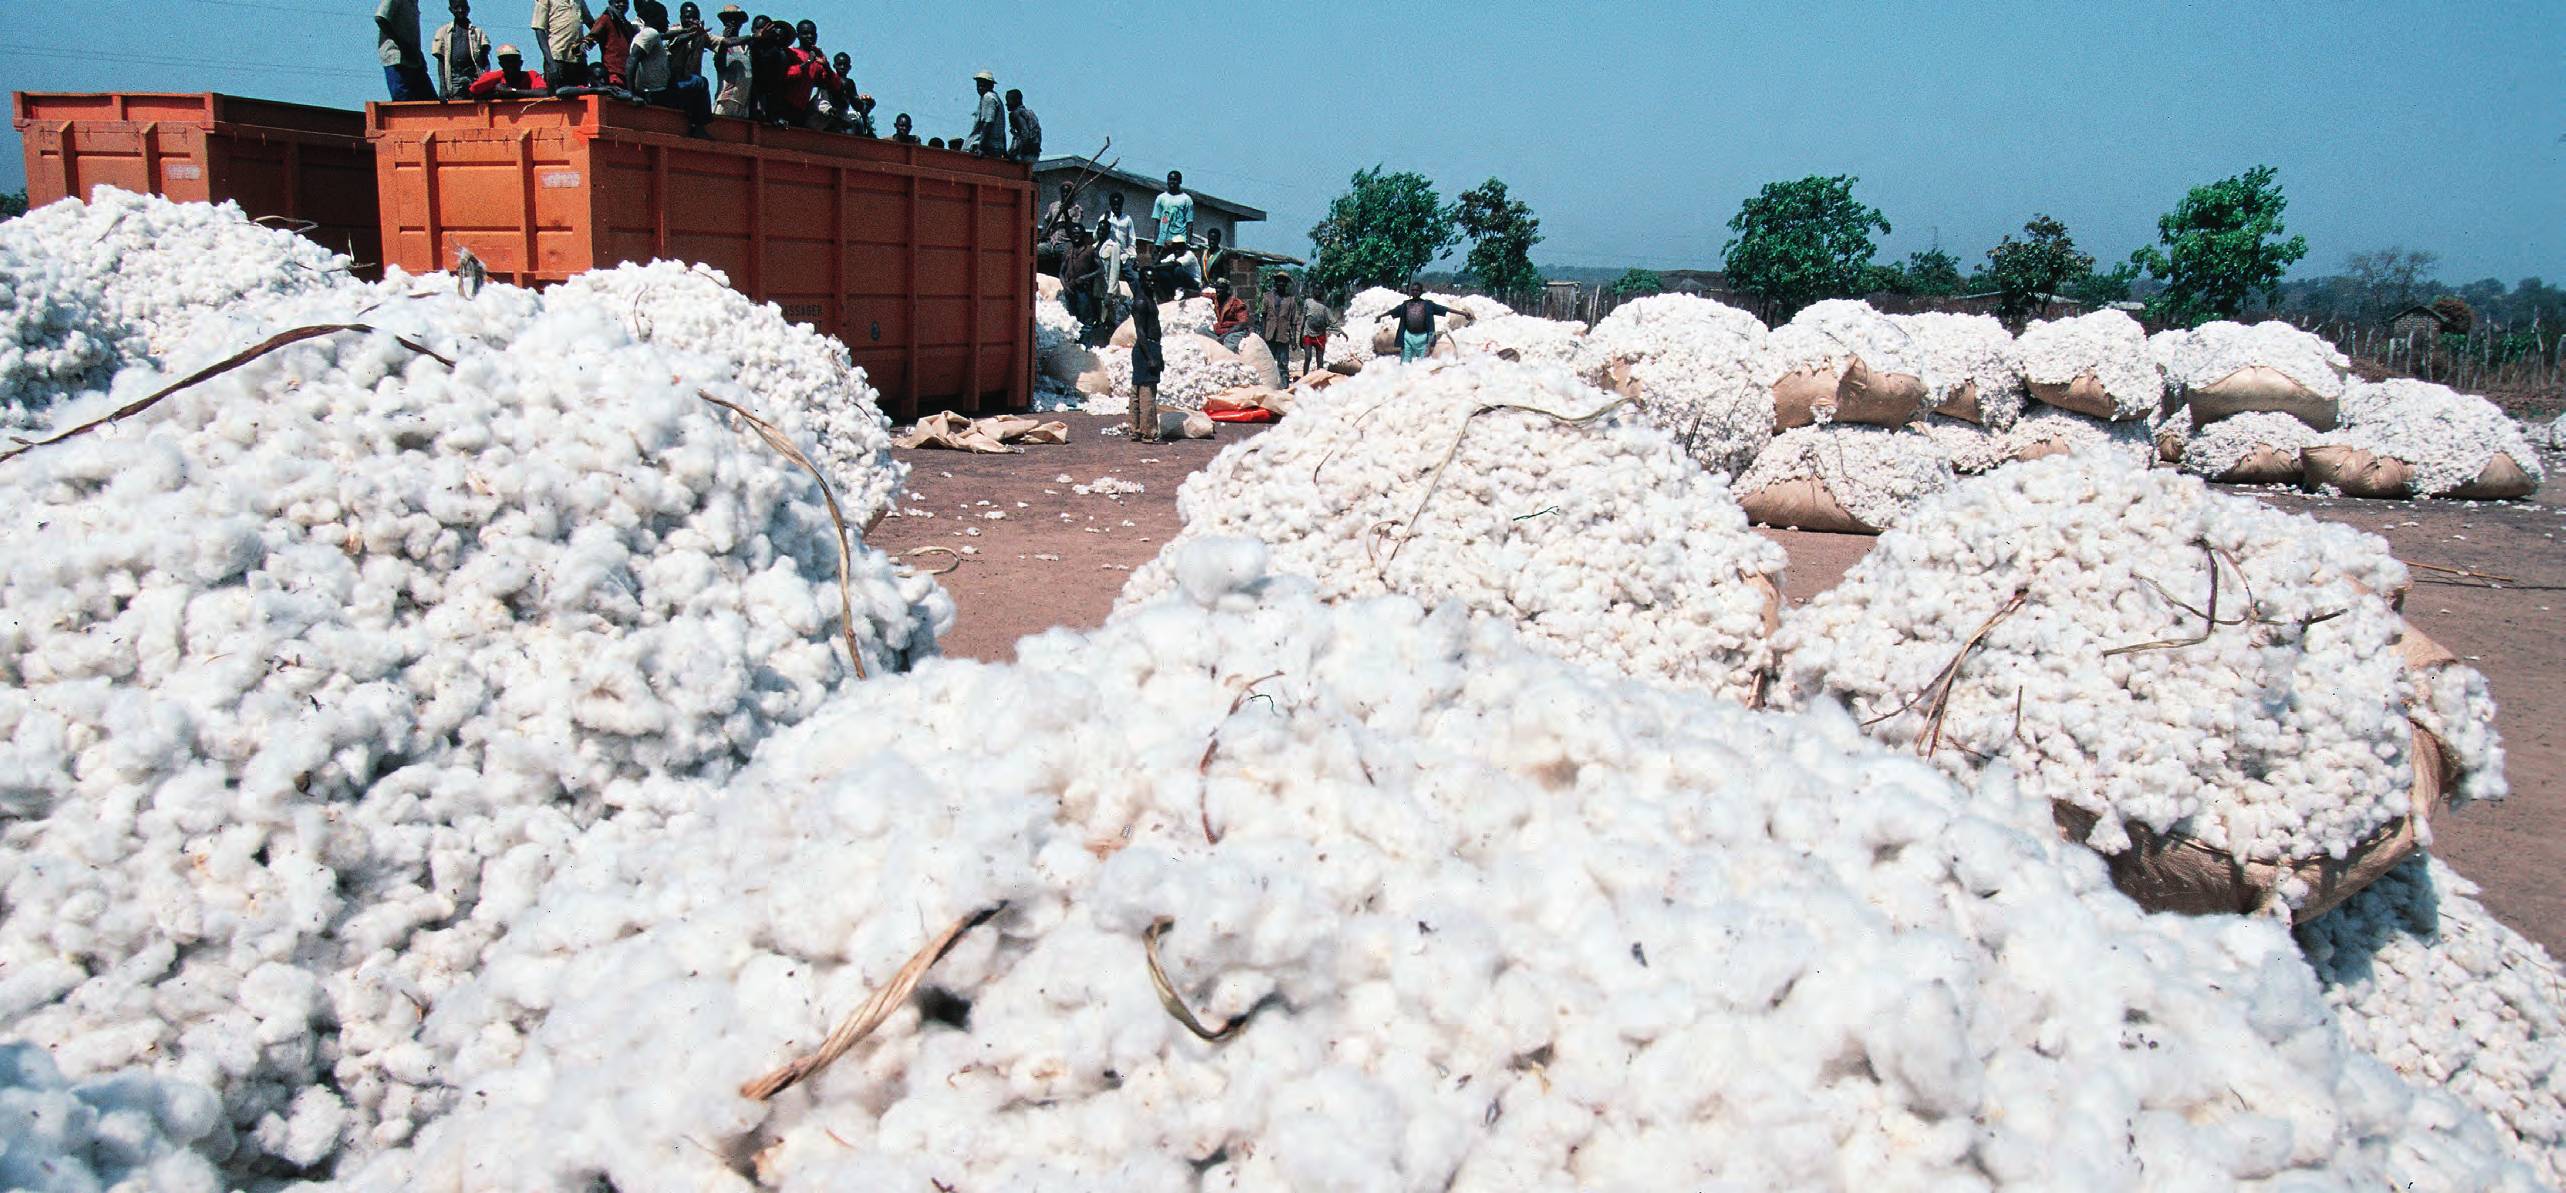 Baling cotton in Korhogo. There are 132,000 producers in the sector.